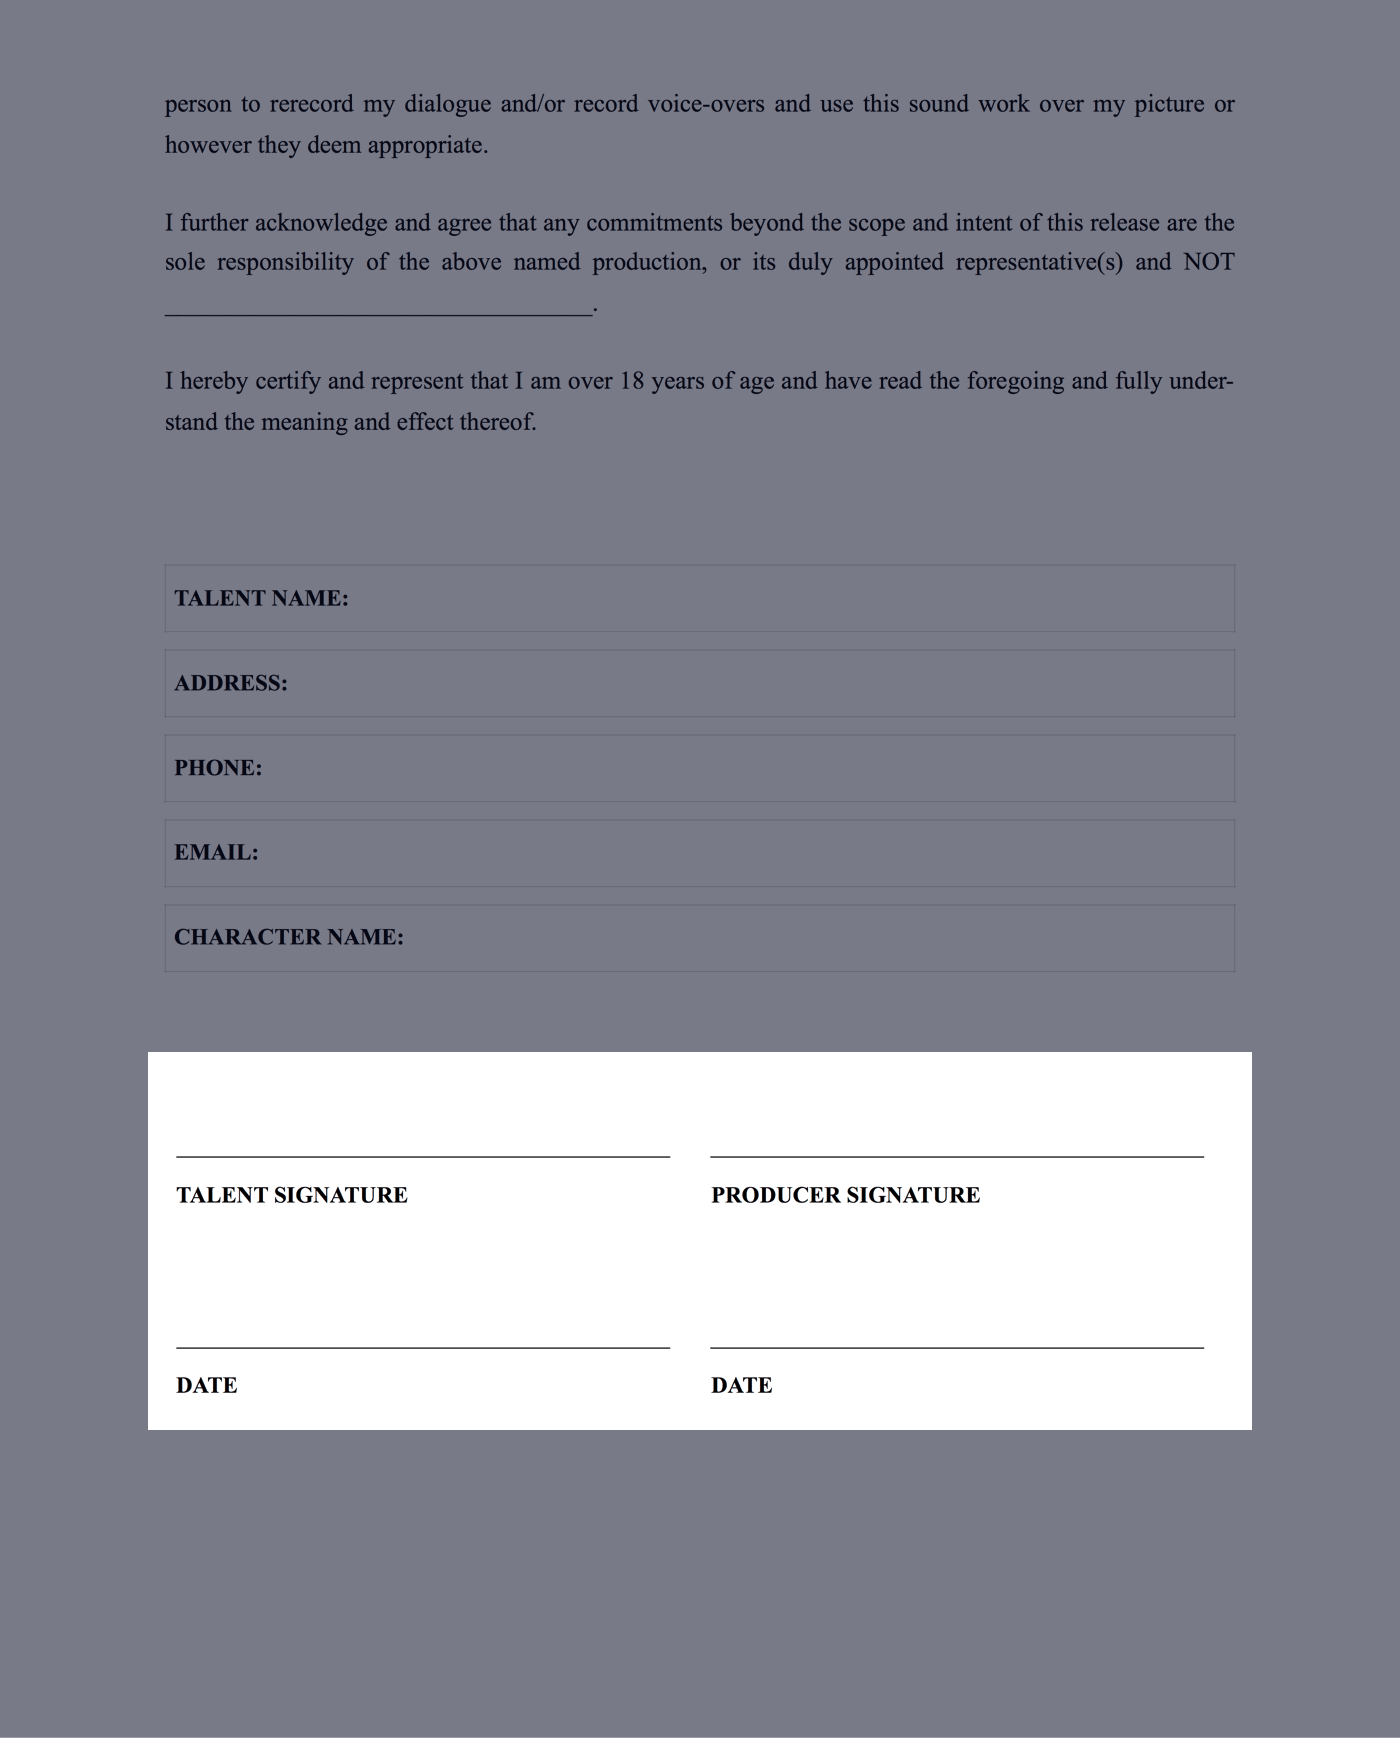 Film Actor Release Form Template - Talent and Producers Signatures - StudioBinder